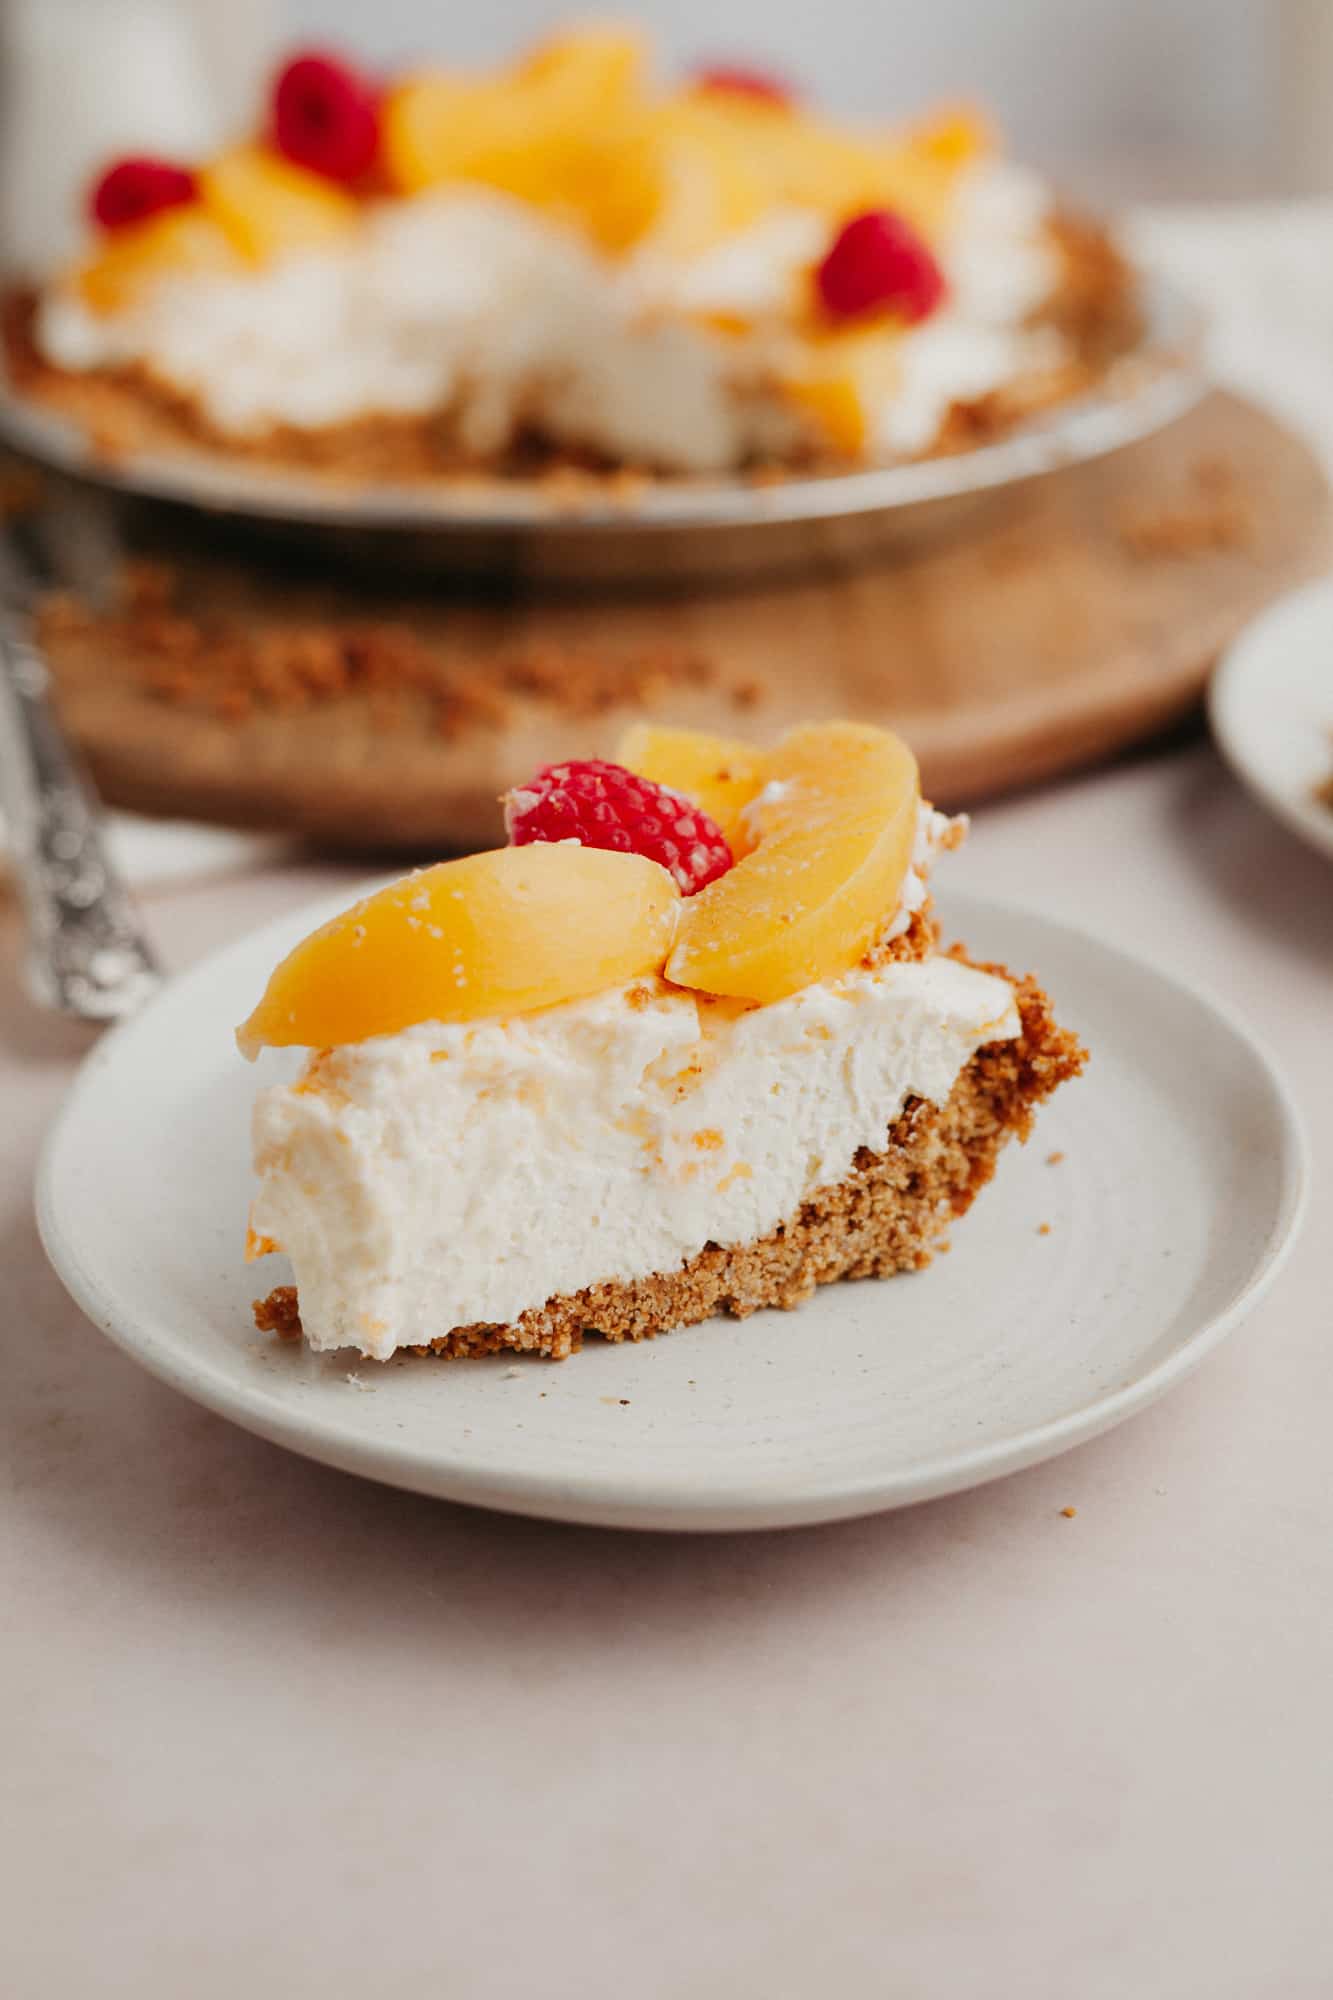 A slice of no bake peach pie on a small beige plate, topped with sliced peaches.